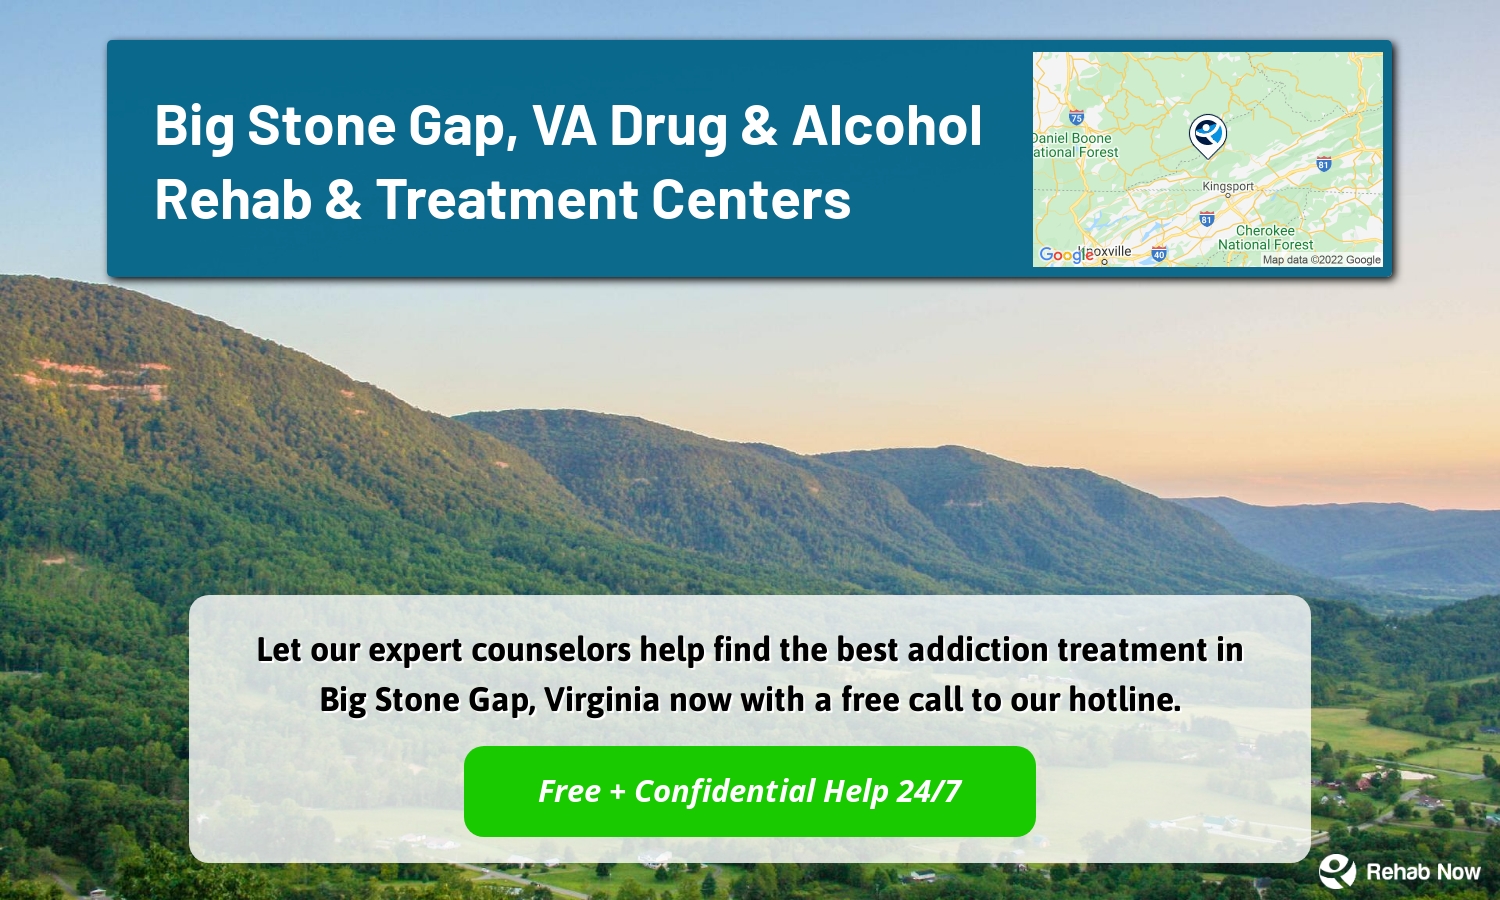 Let our expert counselors help find the best addiction treatment in Big Stone Gap, Virginia now with a free call to our hotline.